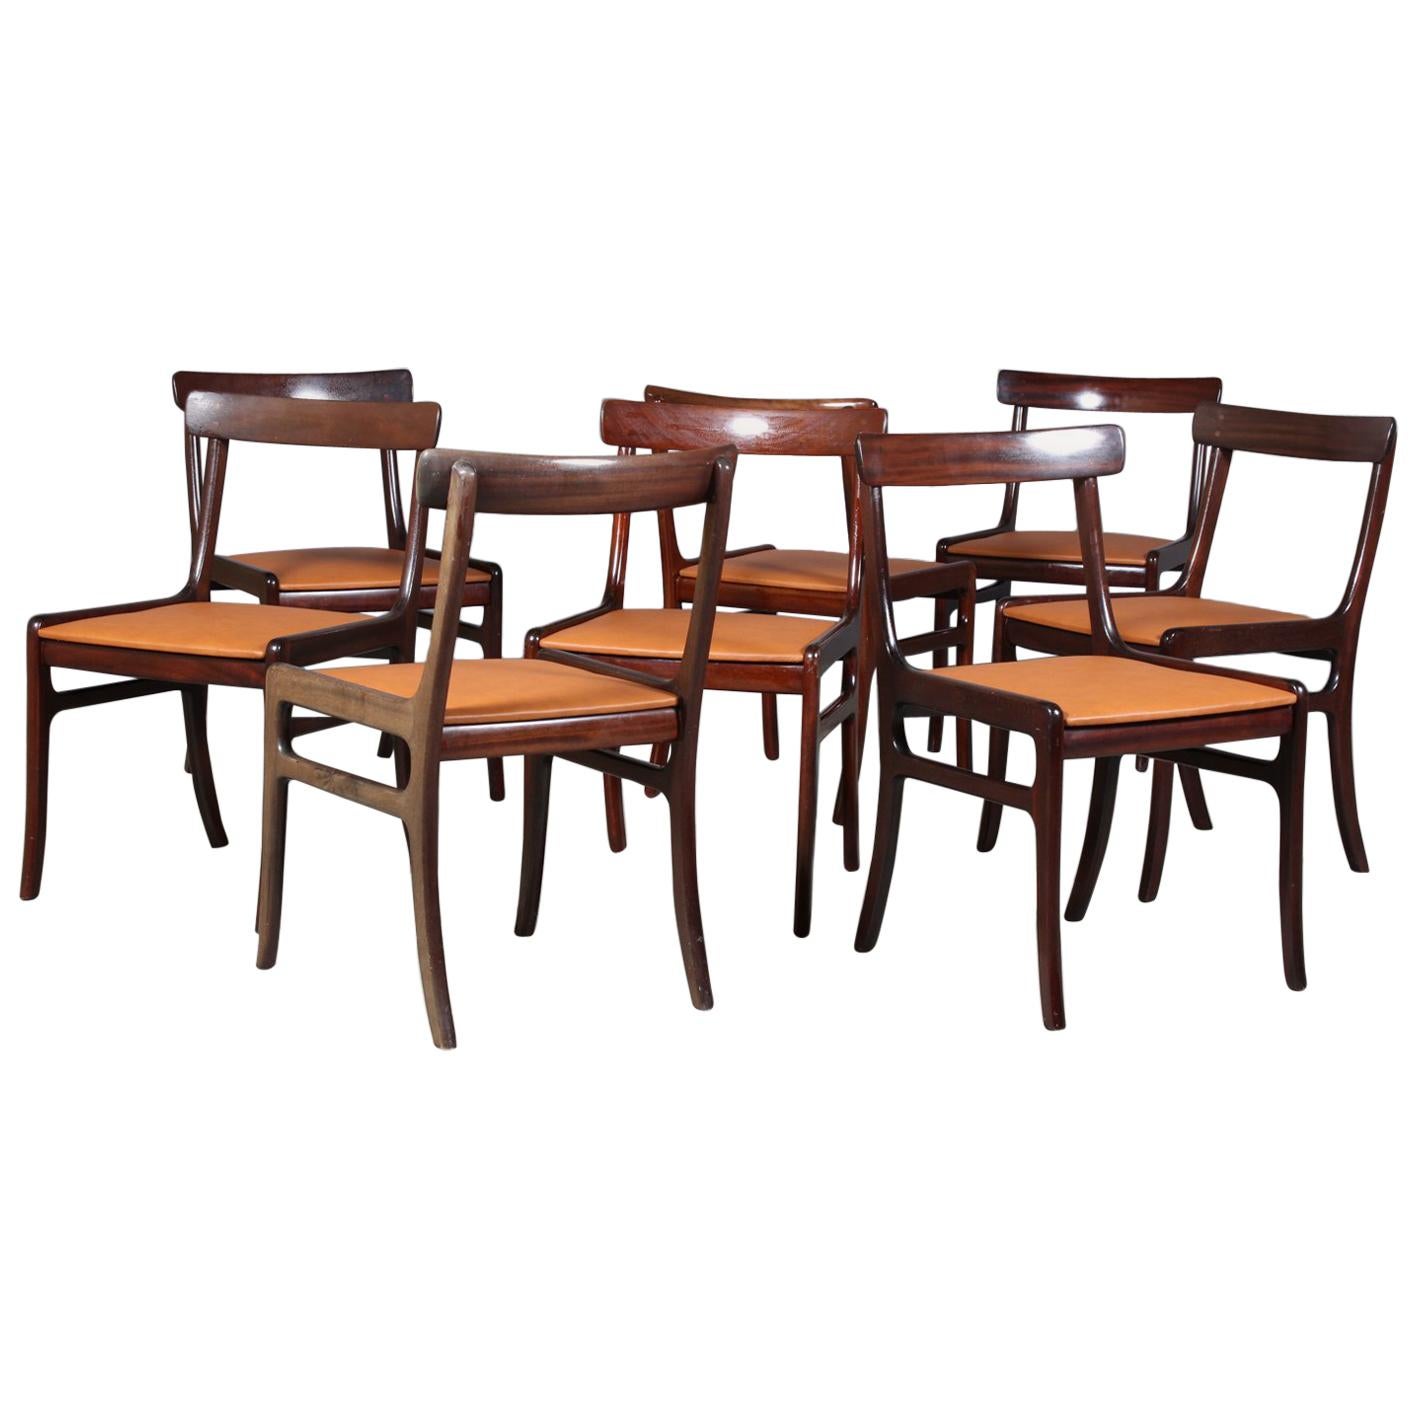 Ole Wanscher Eight Dining Chairs, Model PJ112 Semi Aniline Leather, Rungstedlund